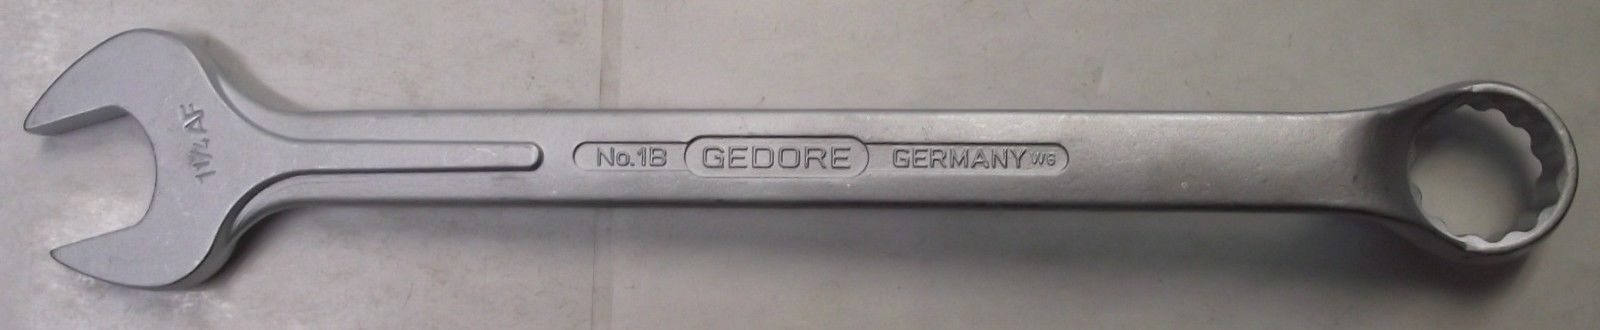 Gedore 6006870 1-1/4AF Combination Spanner Wrench Germany